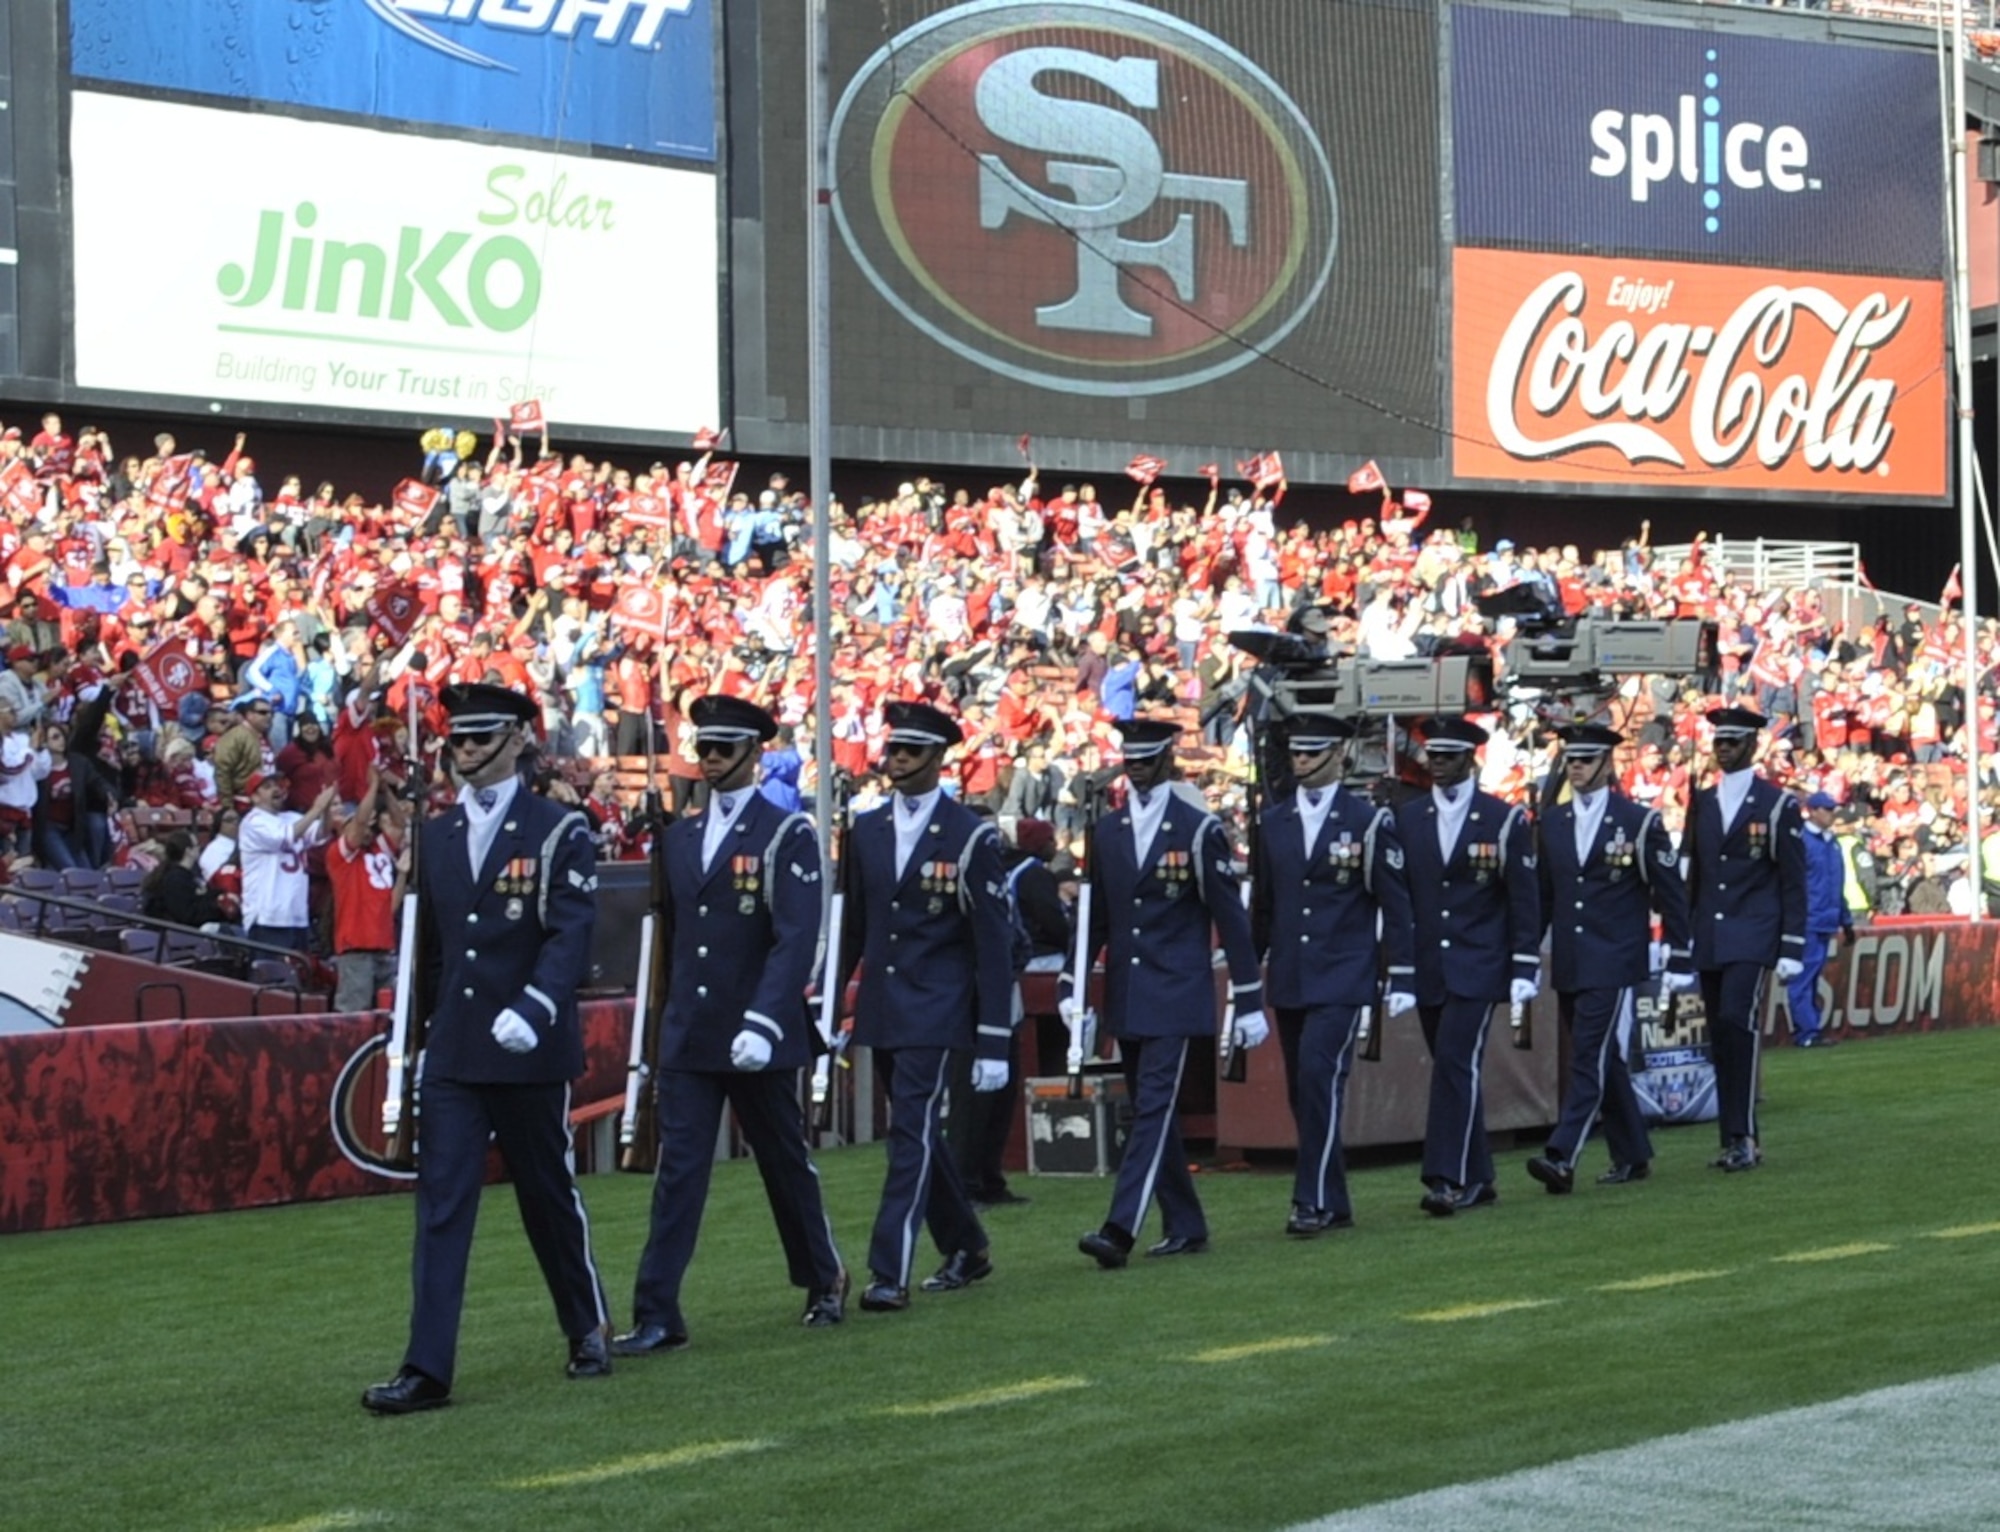 U.S. Air Force Honor Guard Drill Team members walk on the field at the Detroit Lions vs. San Francisco 49ers NFL football game at Candlestick Park in San Francisco, Calif., Sept. 16, 2012.  The Drill Team performed in front of more than 500 people during a pre-game drill and stood on the field during the National Anthem in front of a sold-out crowd.  (U.S. Air Force photo by Senior Master Sgt. Adam M. Stump)